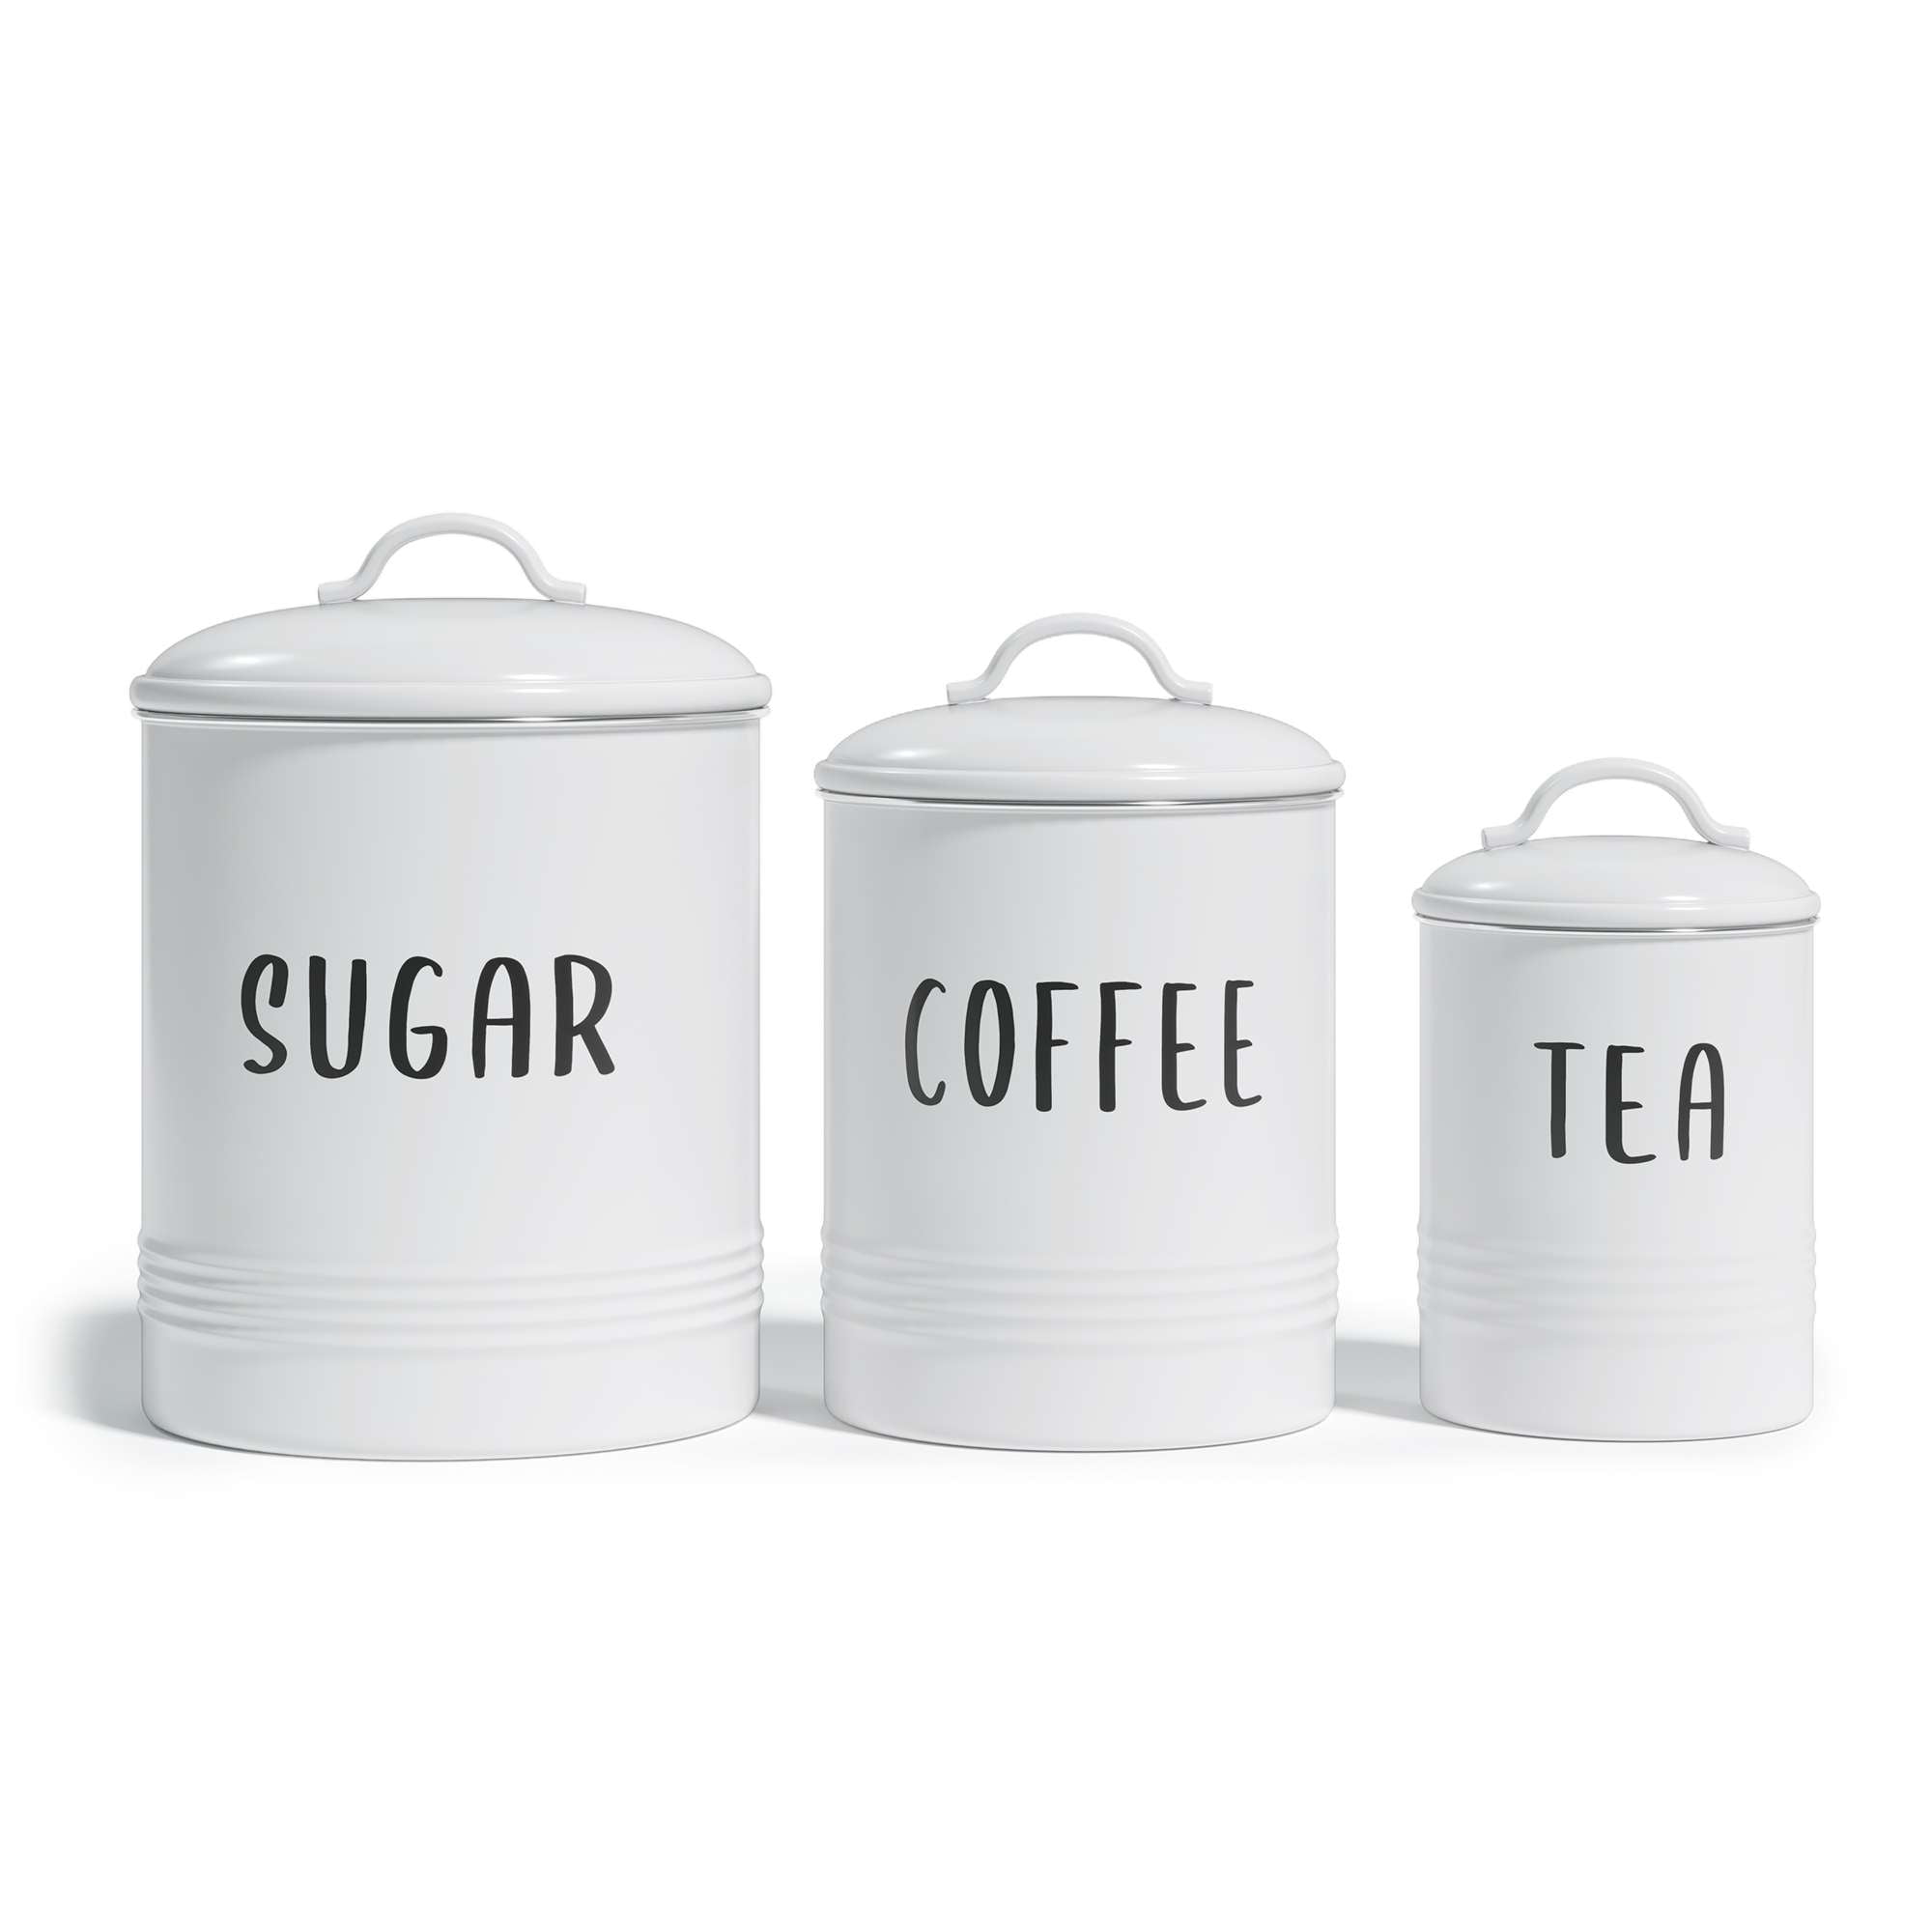 Modern Market Canister Sets for Kitchen Counter, Vintage Kitchen Canisters,  Country Rustic Farmhouse Decor for the Kitchen, Coffee Tea Sugar Flour  Farmhouse Kitchen Decor, Metal, Speckle Set of 3 